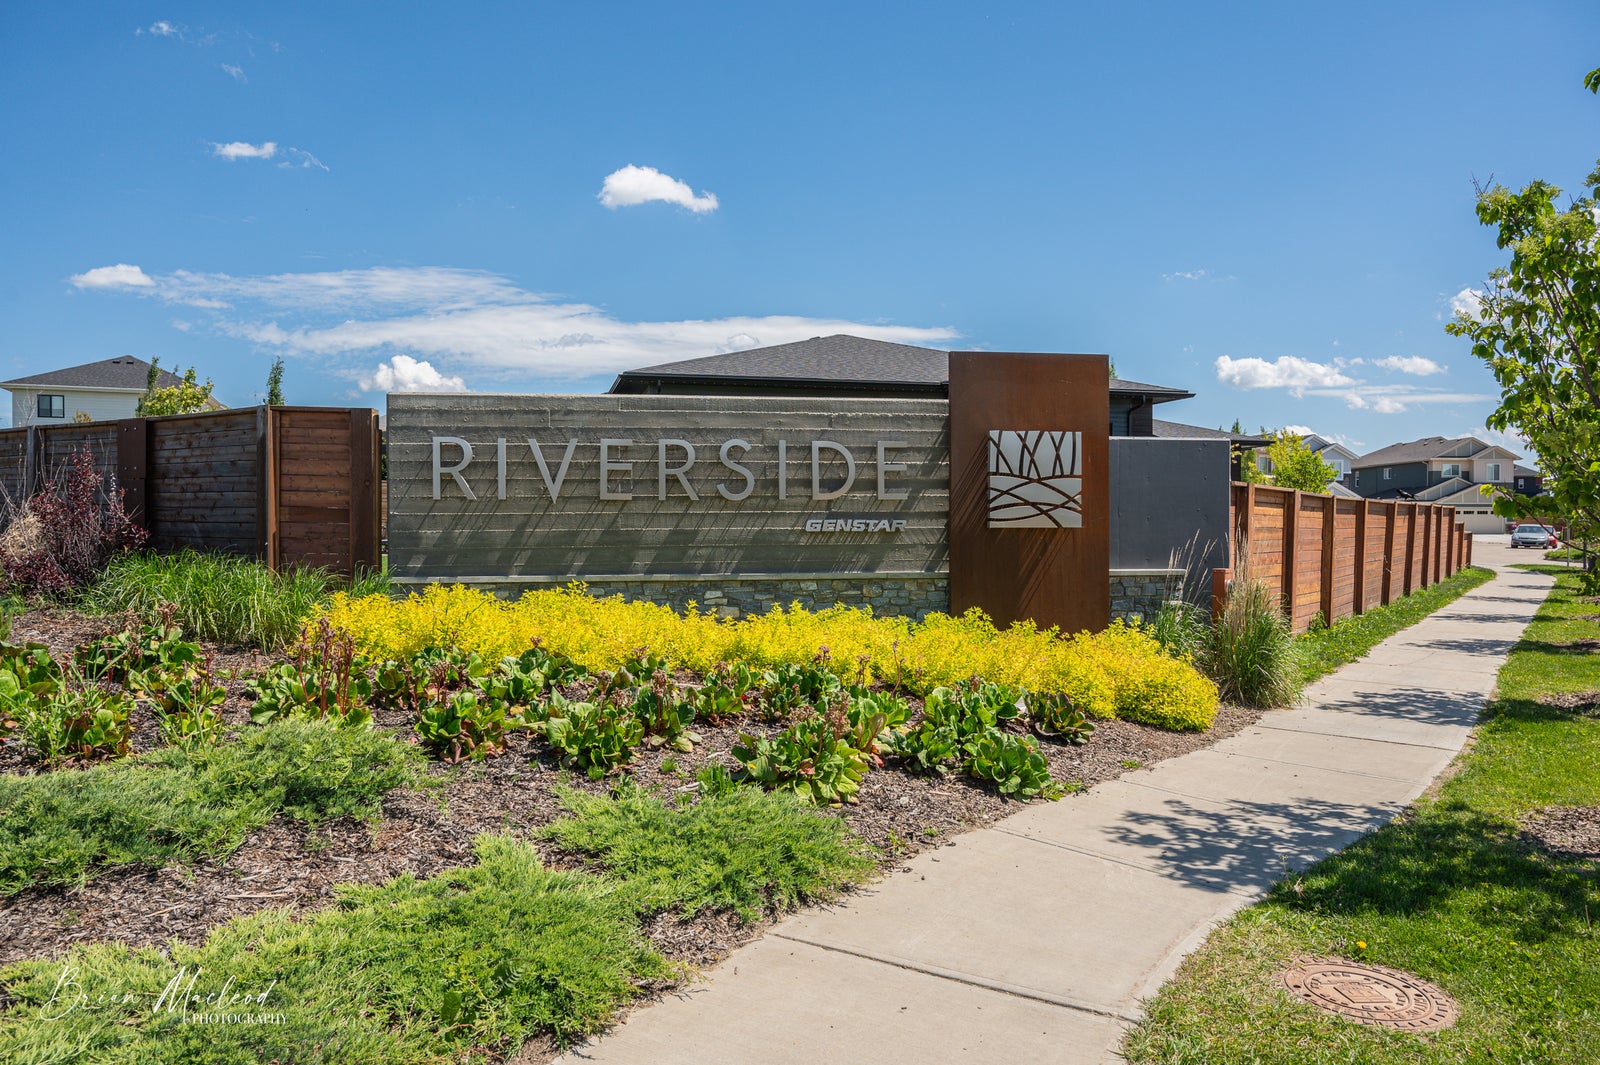 Riverside subdivision sign, sunny day, in St Albert